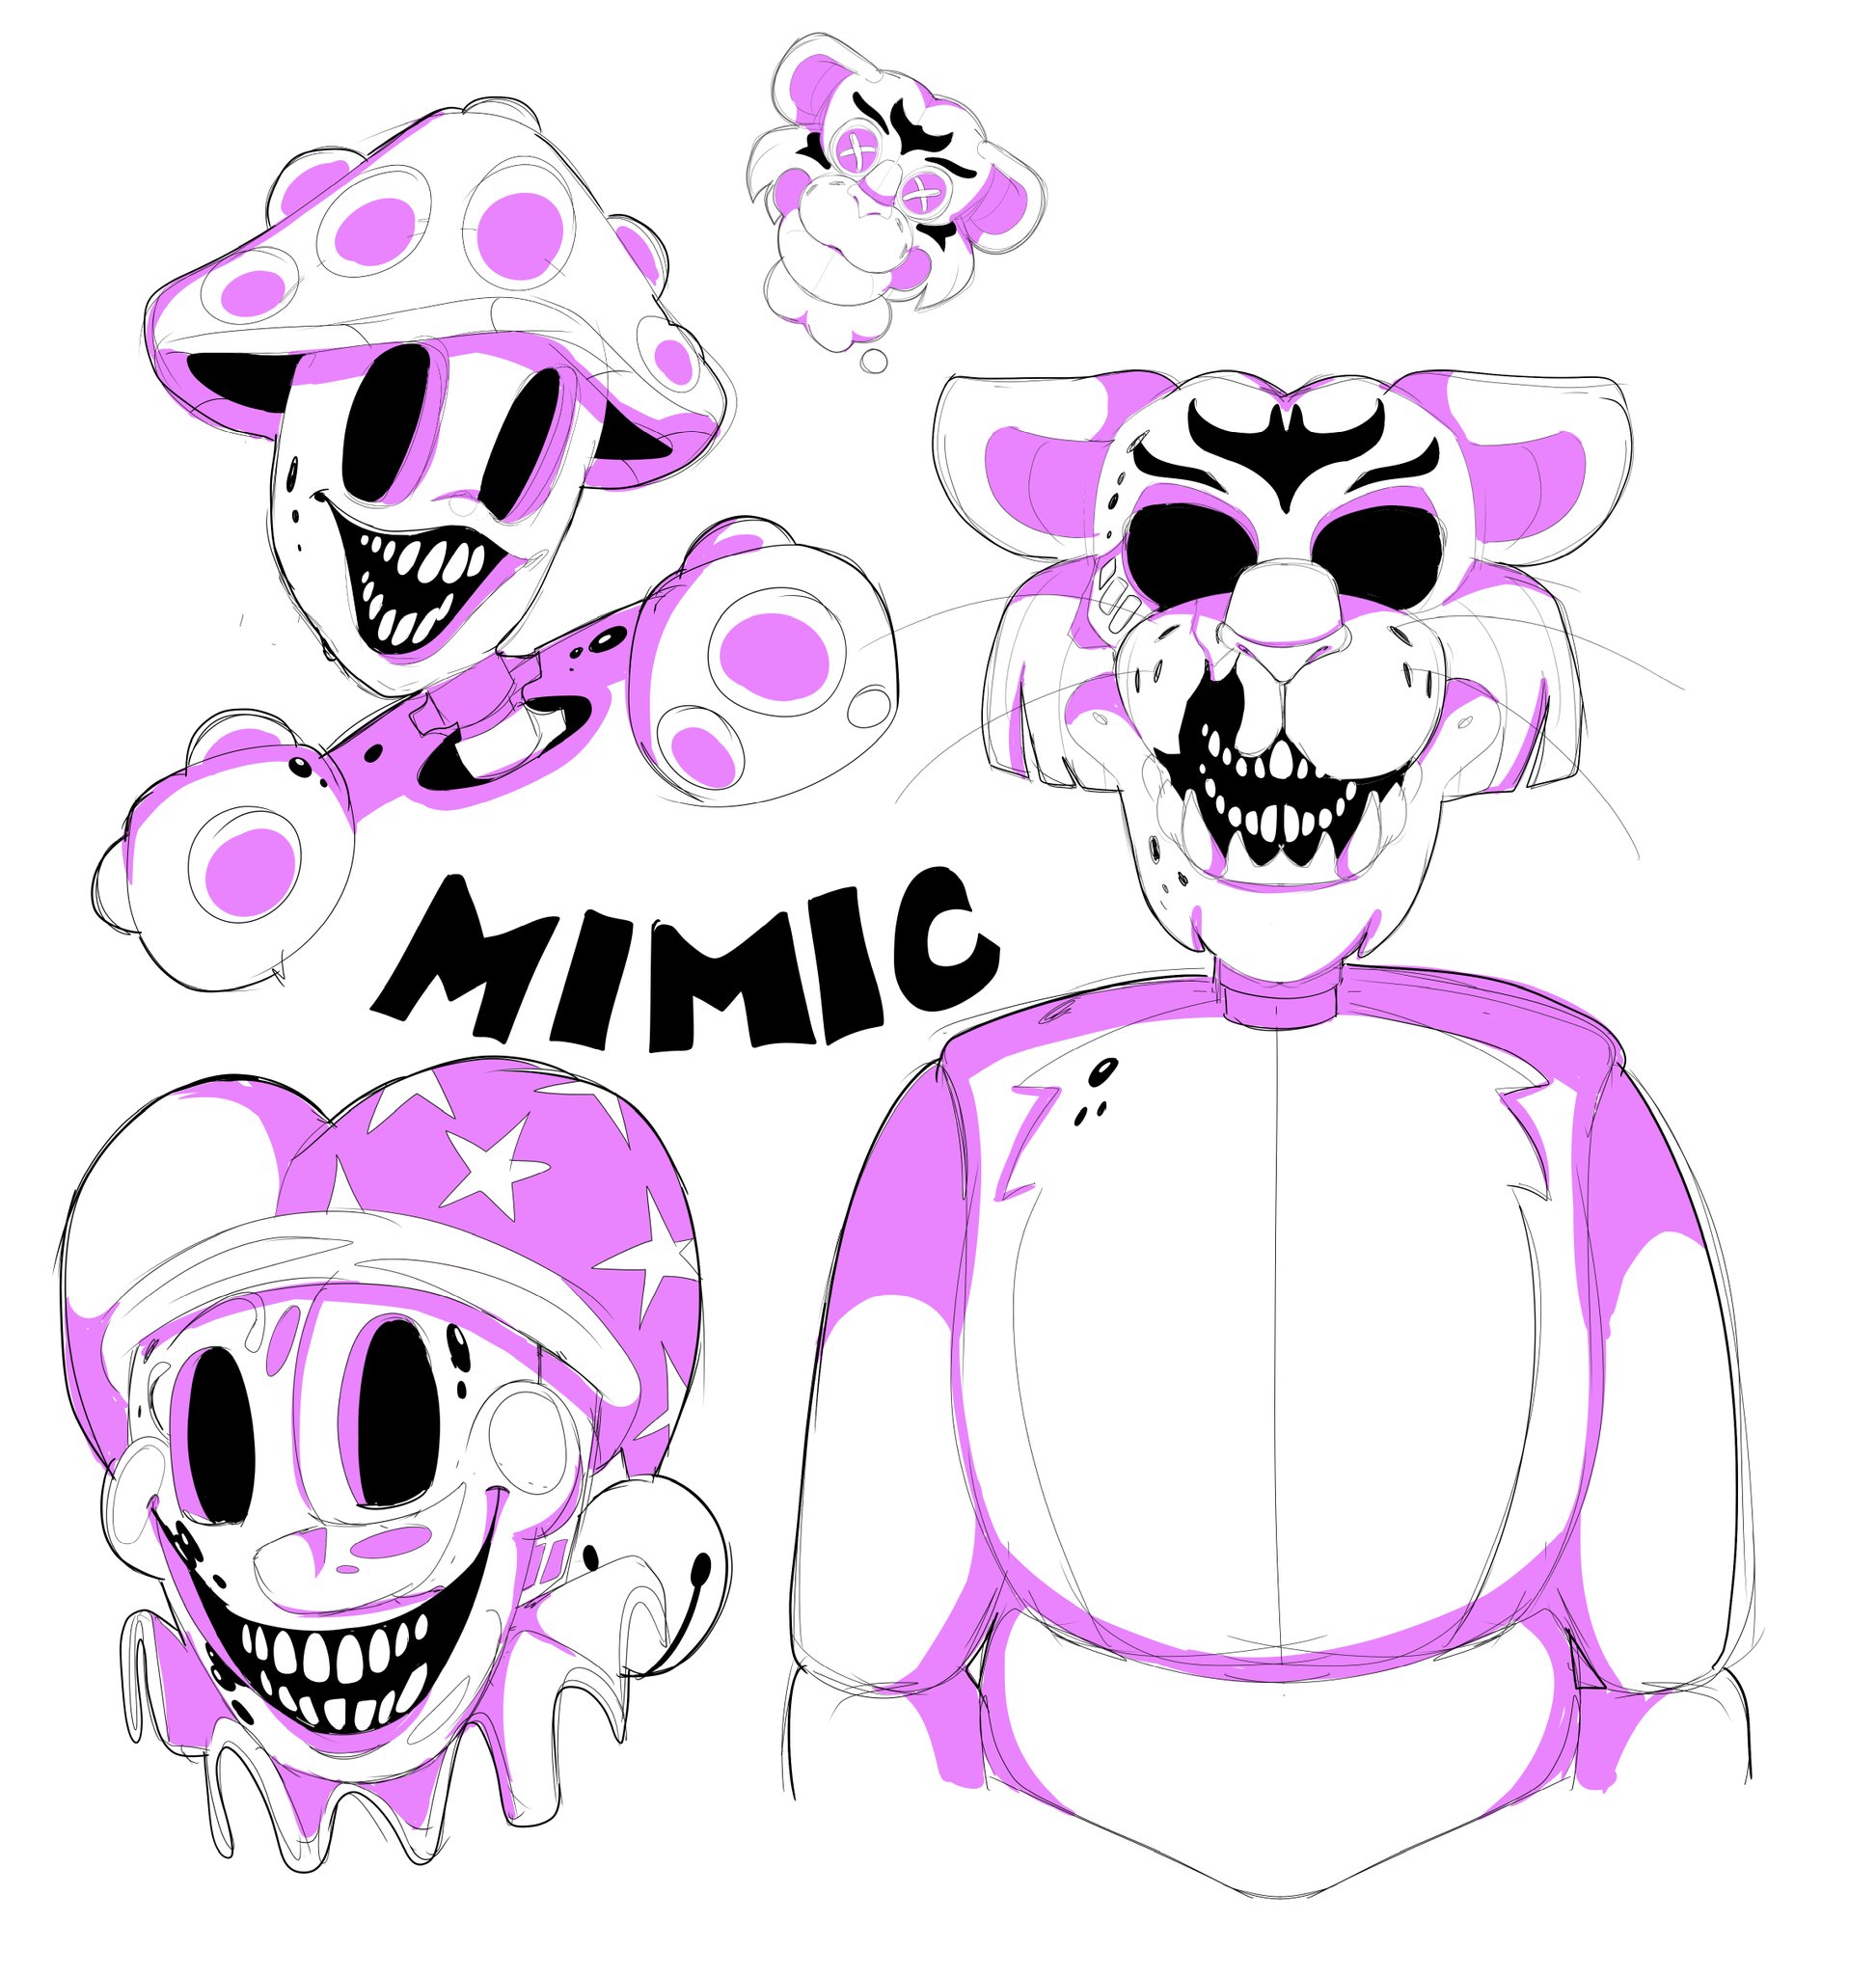 🐙 MargoGamer 🍄 on X: //SPOILERS FOR THE MIMIC// Mimic suits